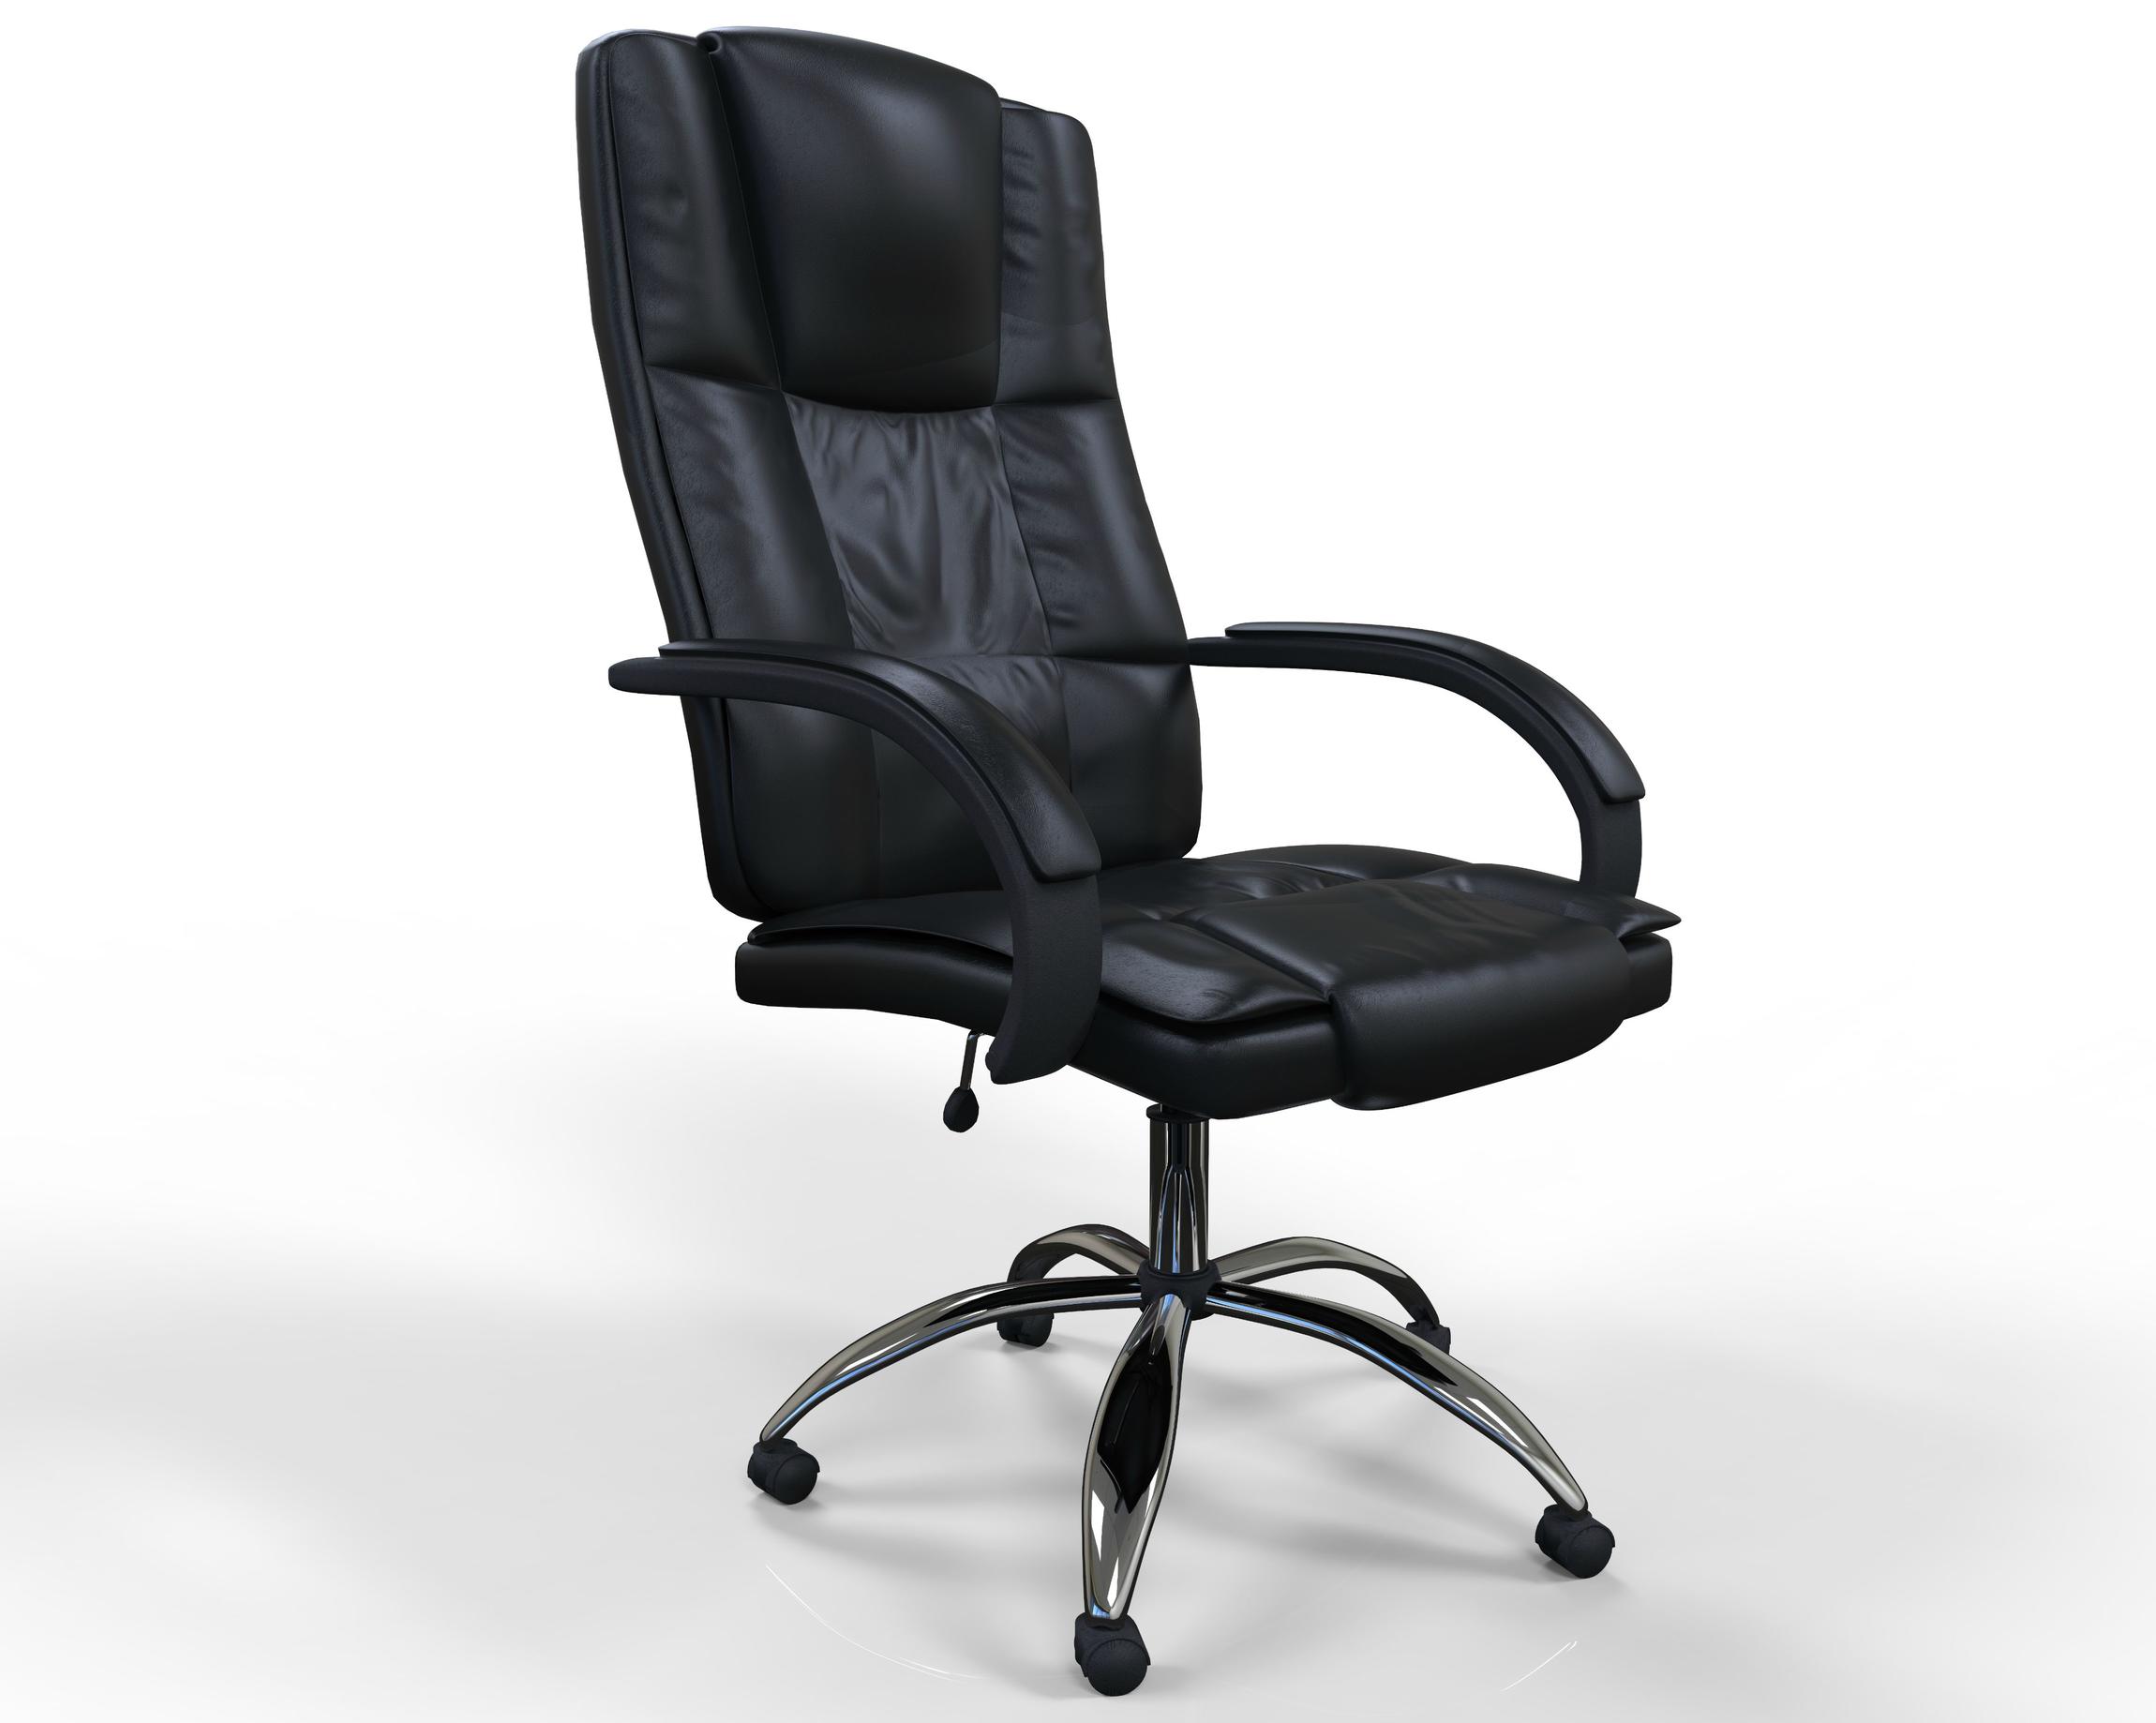 Office Chair render - Finished Projects - Blender Artists Community